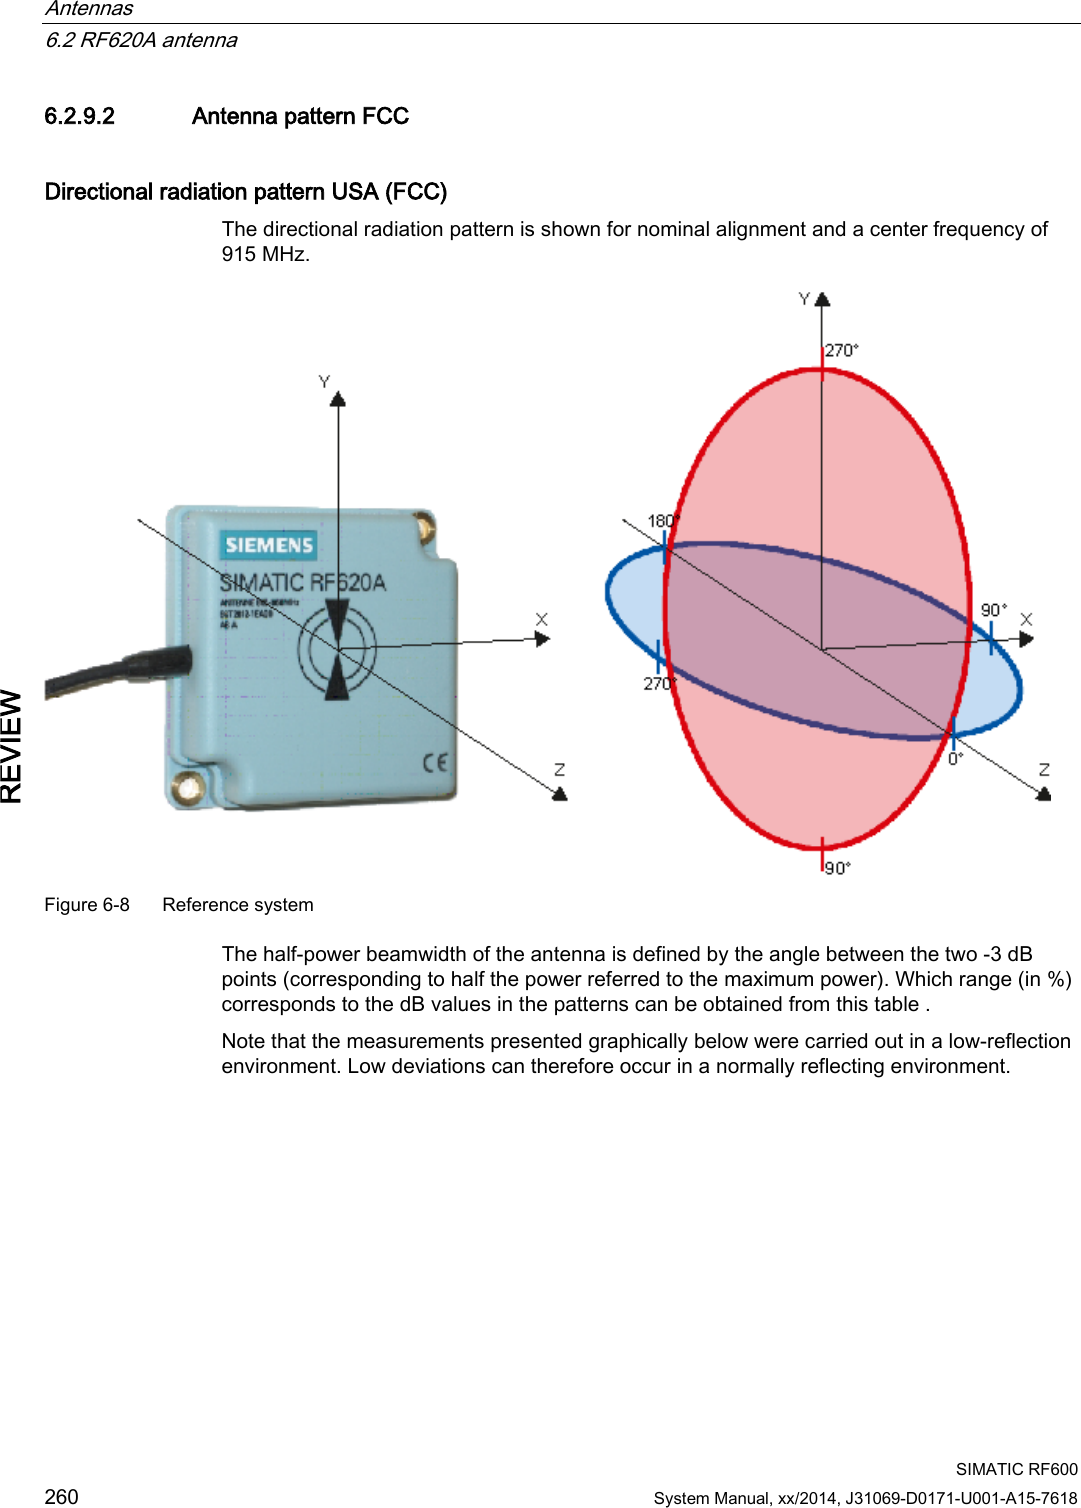 Antennas   6.2 RF620A antenna  SIMATIC RF600 260 System Manual, xx/2014, J31069-D0171-U001-A15-7618 REVIEW 6.2.9.2 Antenna pattern FCC Directional radiation pattern USA (FCC) The directional radiation pattern is shown for nominal alignment and a center frequency of 915 MHz.   Figure 6-8  Reference system The half-power beamwidth of the antenna is defined by the angle between the two -3 dB points (corresponding to half the power referred to the maximum power). Which range (in %) corresponds to the dB values in the patterns can be obtained from this table . Note that the measurements presented graphically below were carried out in a low-reflection environment. Low deviations can therefore occur in a normally reflecting environment. 